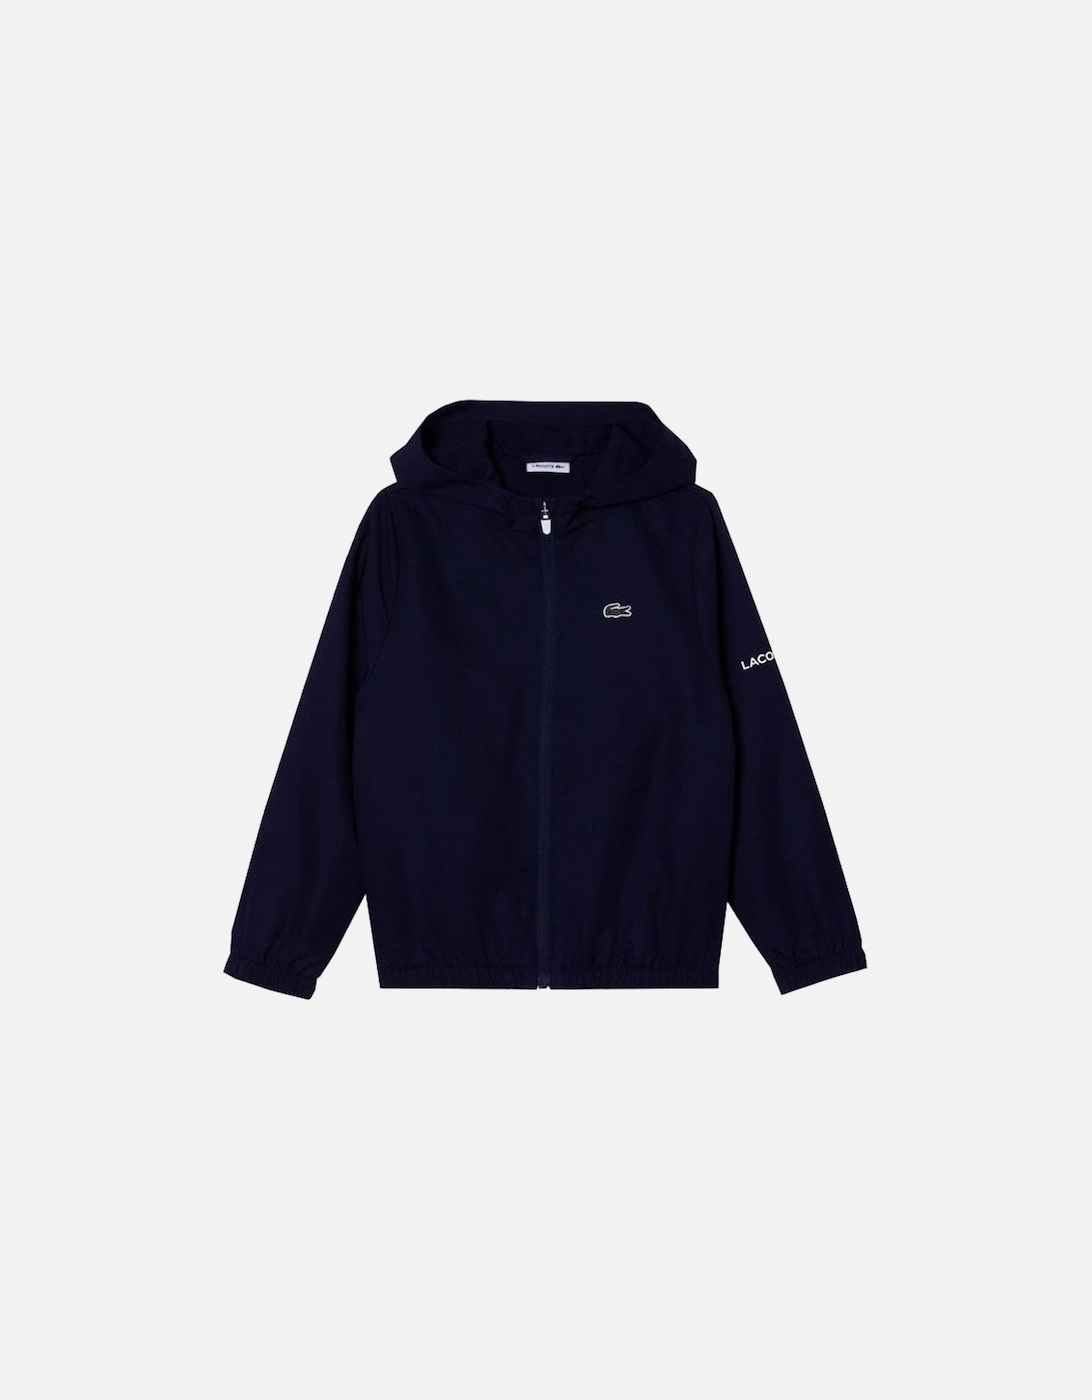 Boy's Navy Blue Zip Up Hooded Tracksuit Jacket, 5 of 4